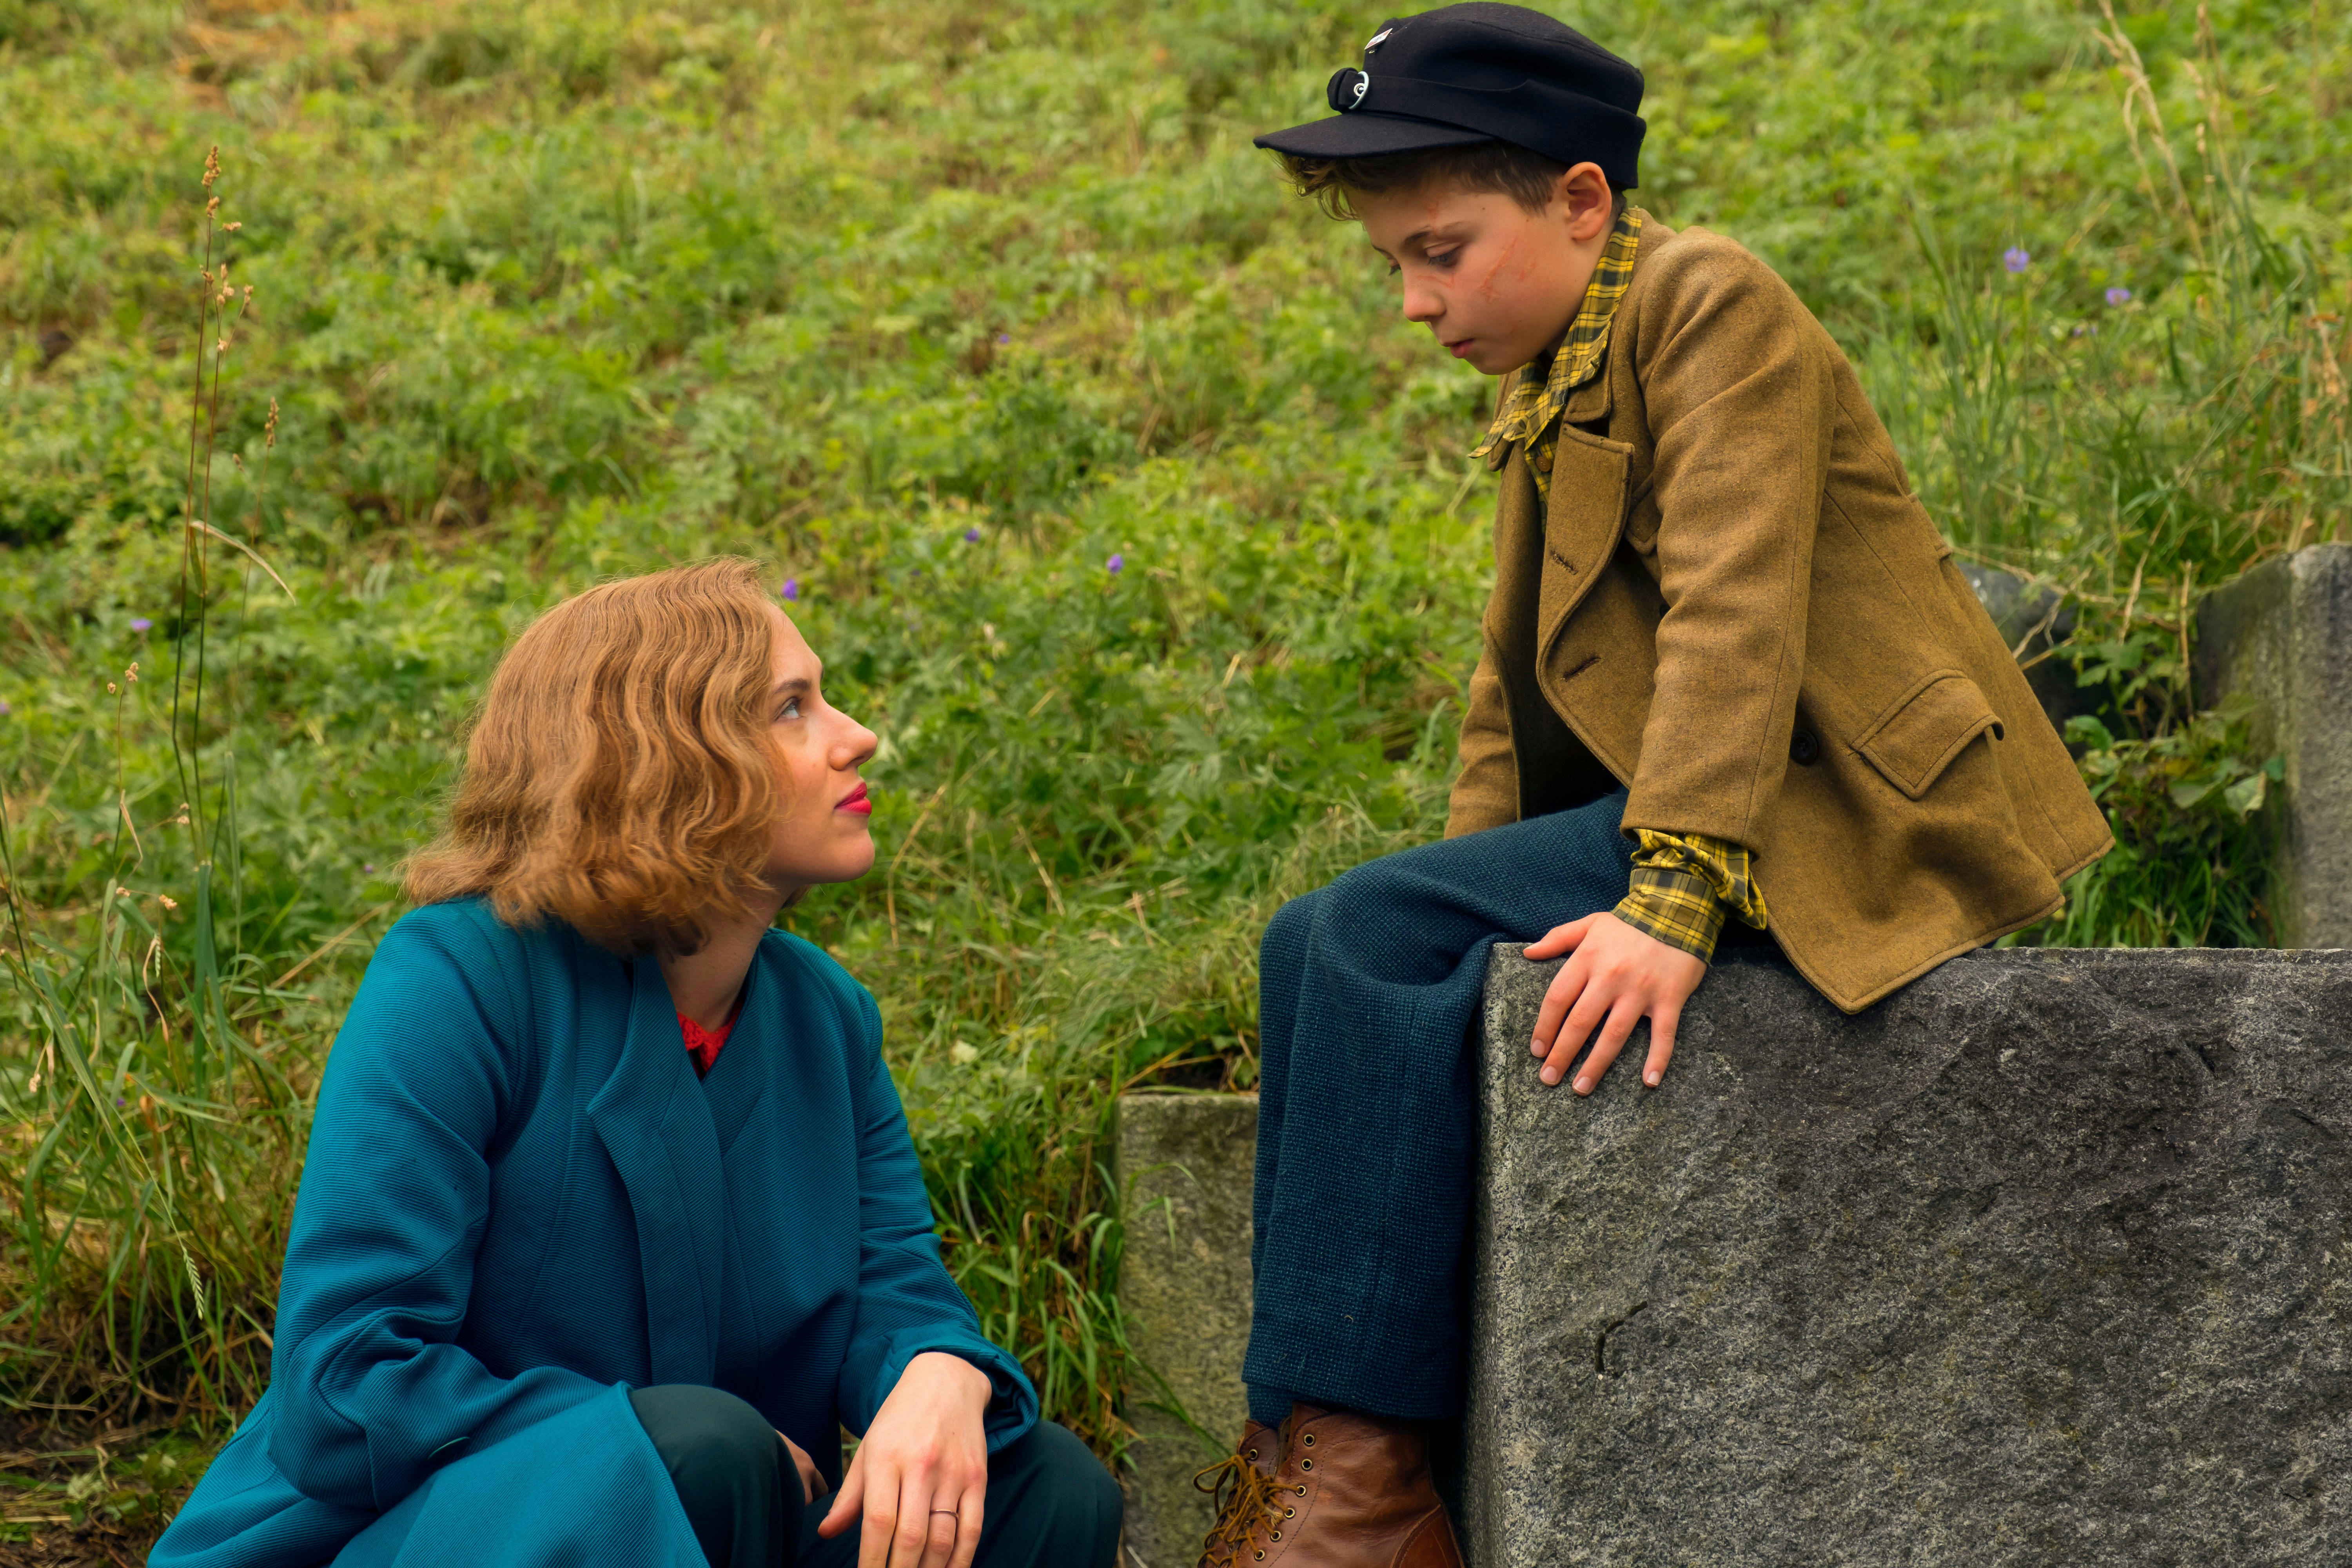 In a still from the movie 'Jojo Rabbit, actor Scarlett Johansson crouches down to talk to  Roman Griffin Davis, who is sitting on a large rock.